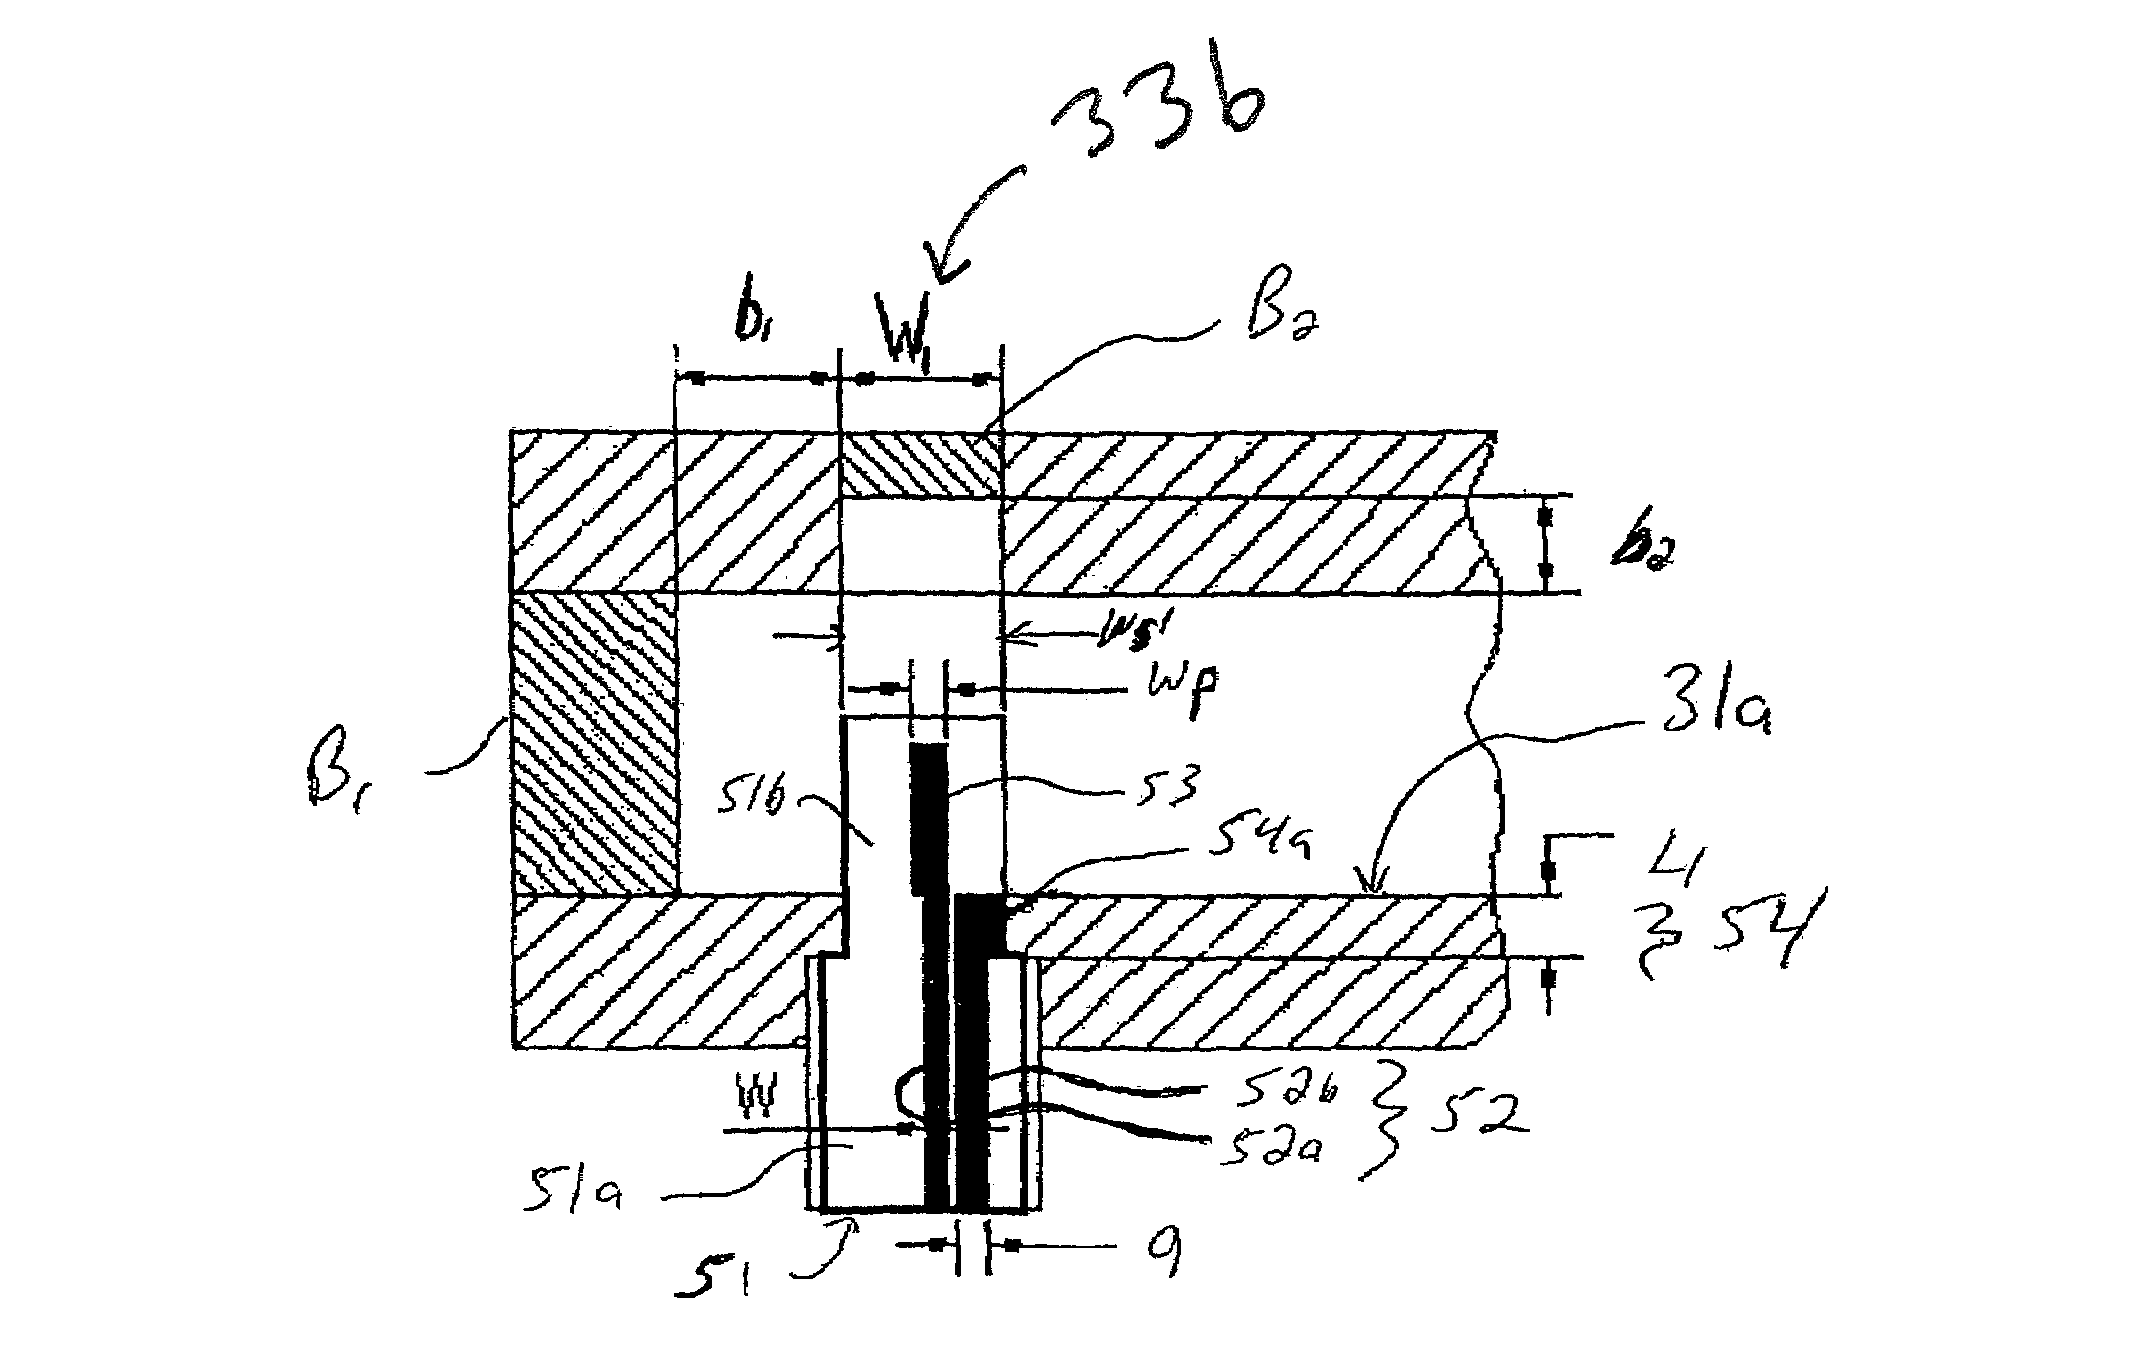 Apparatus and methods for constructing and packaging waveguide to planar transmission line transitions for millimeter wave applications